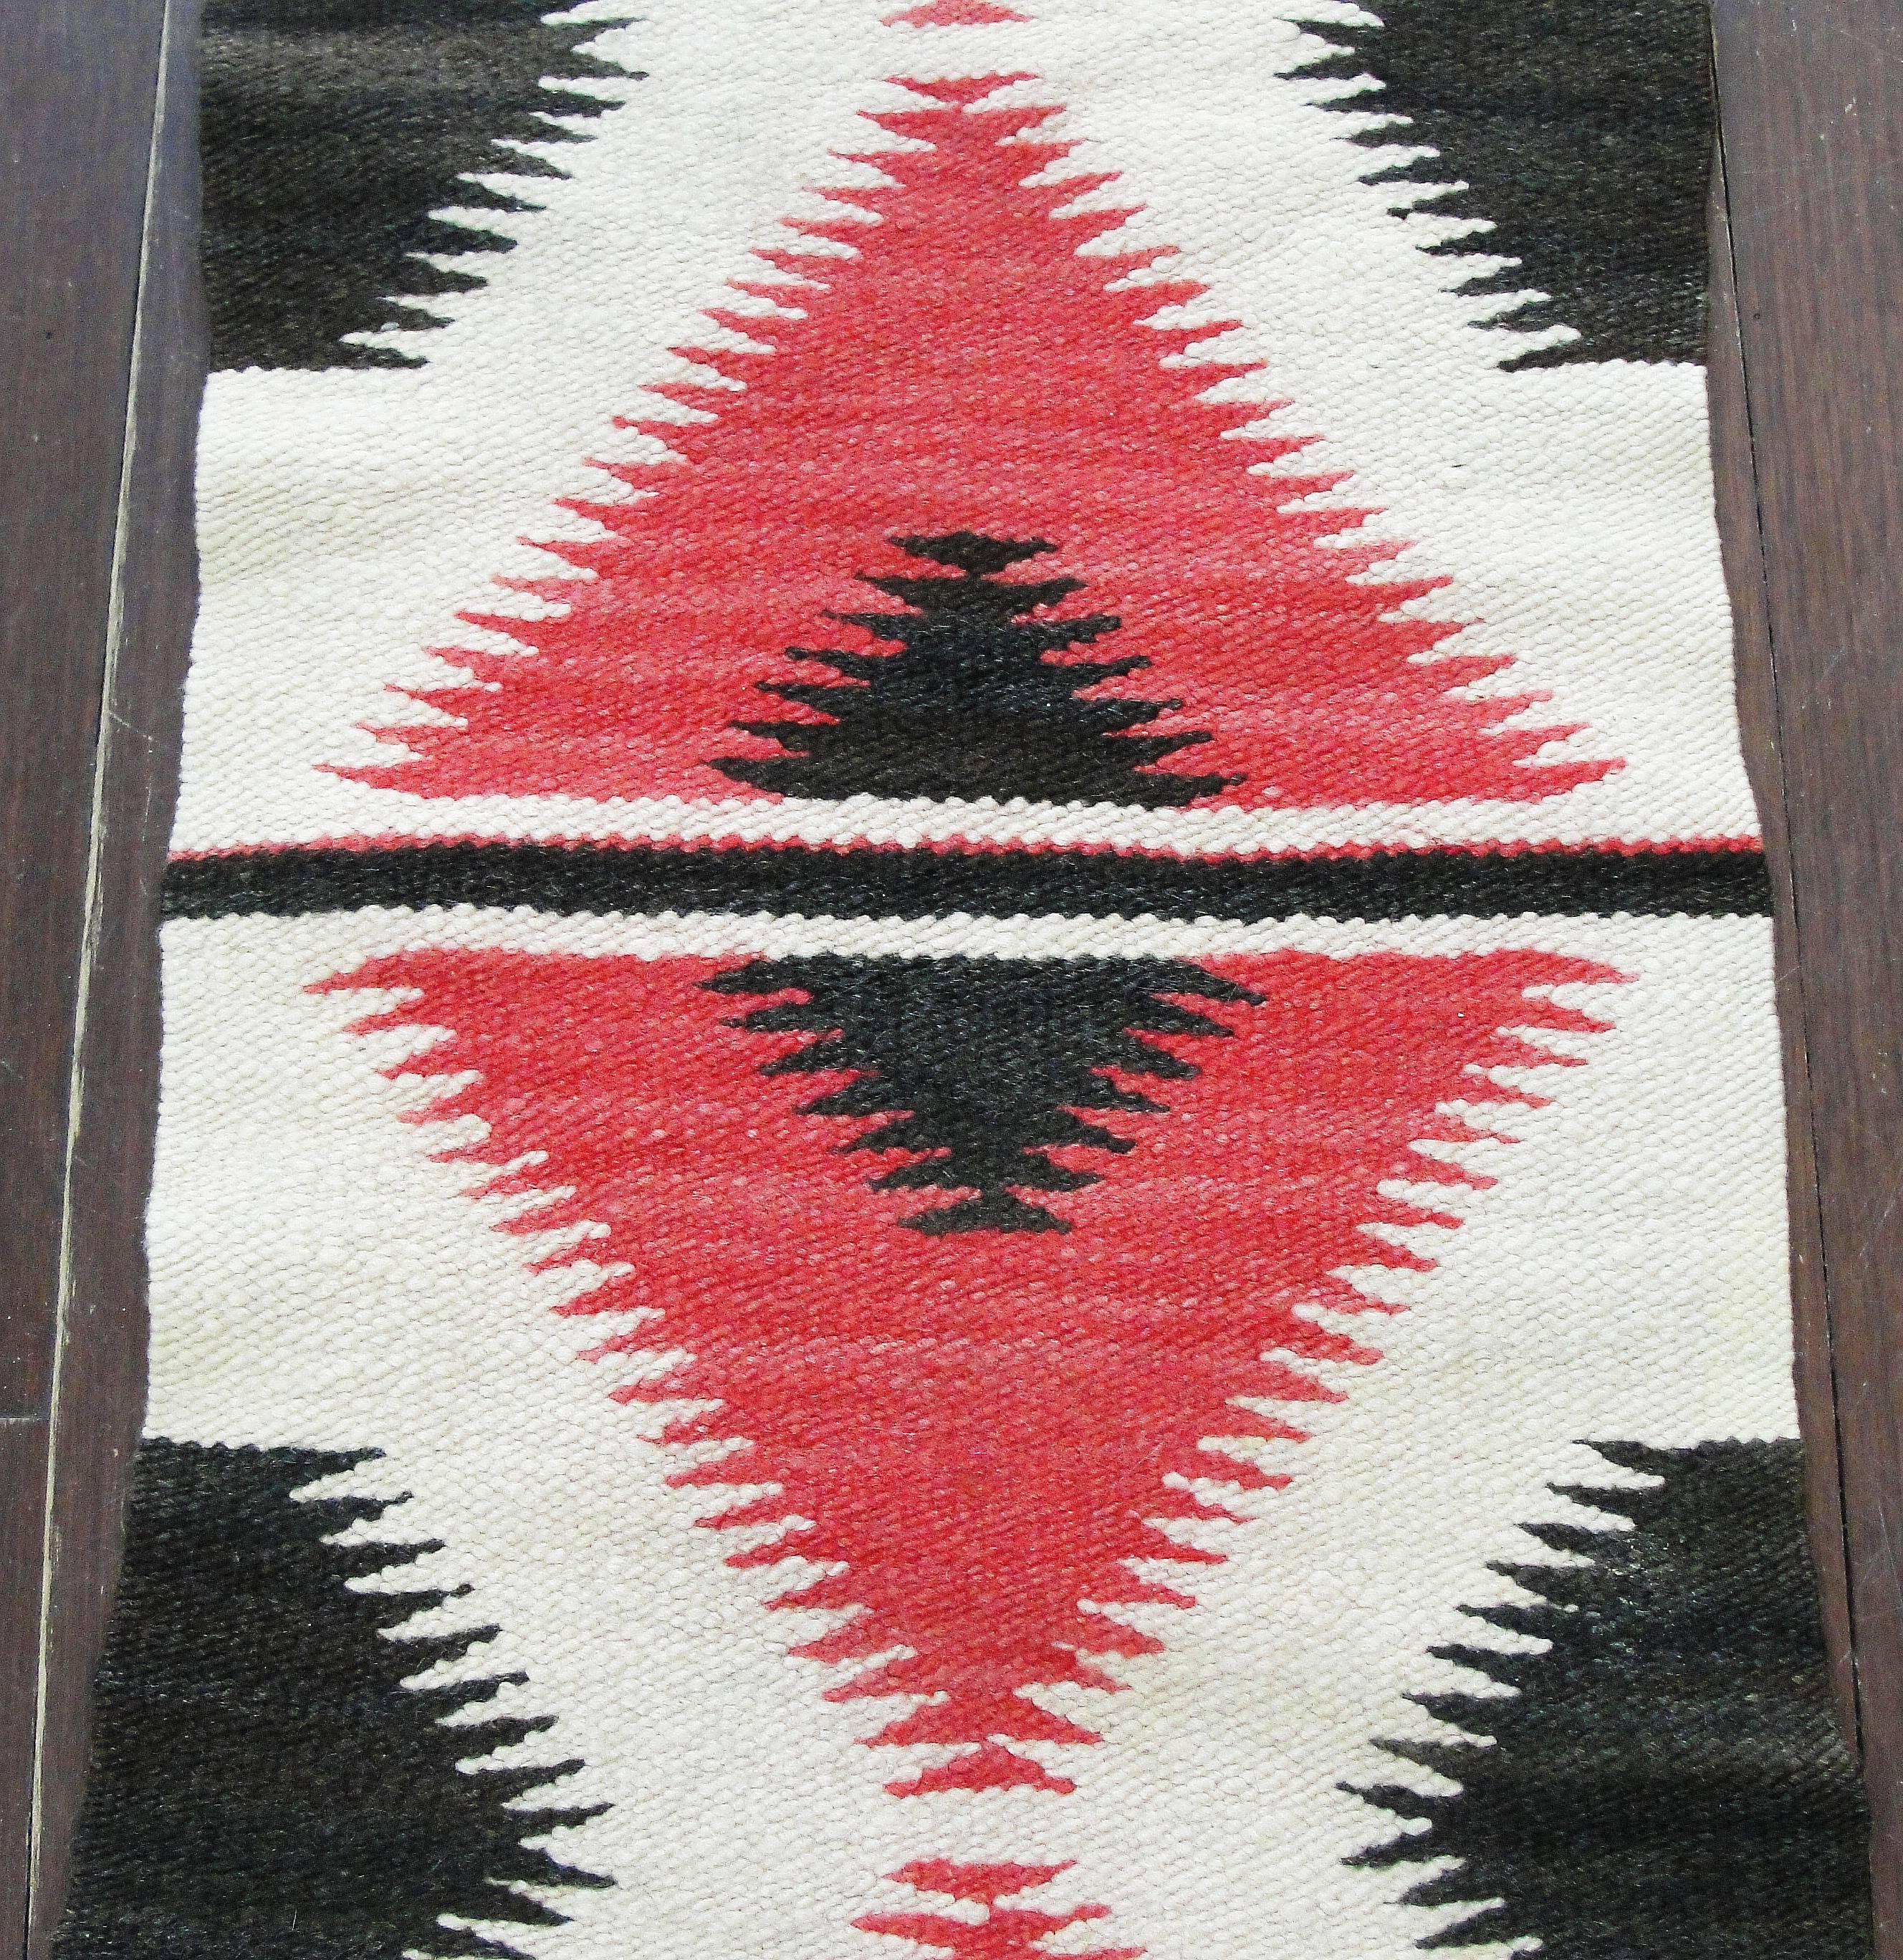 Hand-Woven Spectacular Antique Double Saddle Navajo Rug